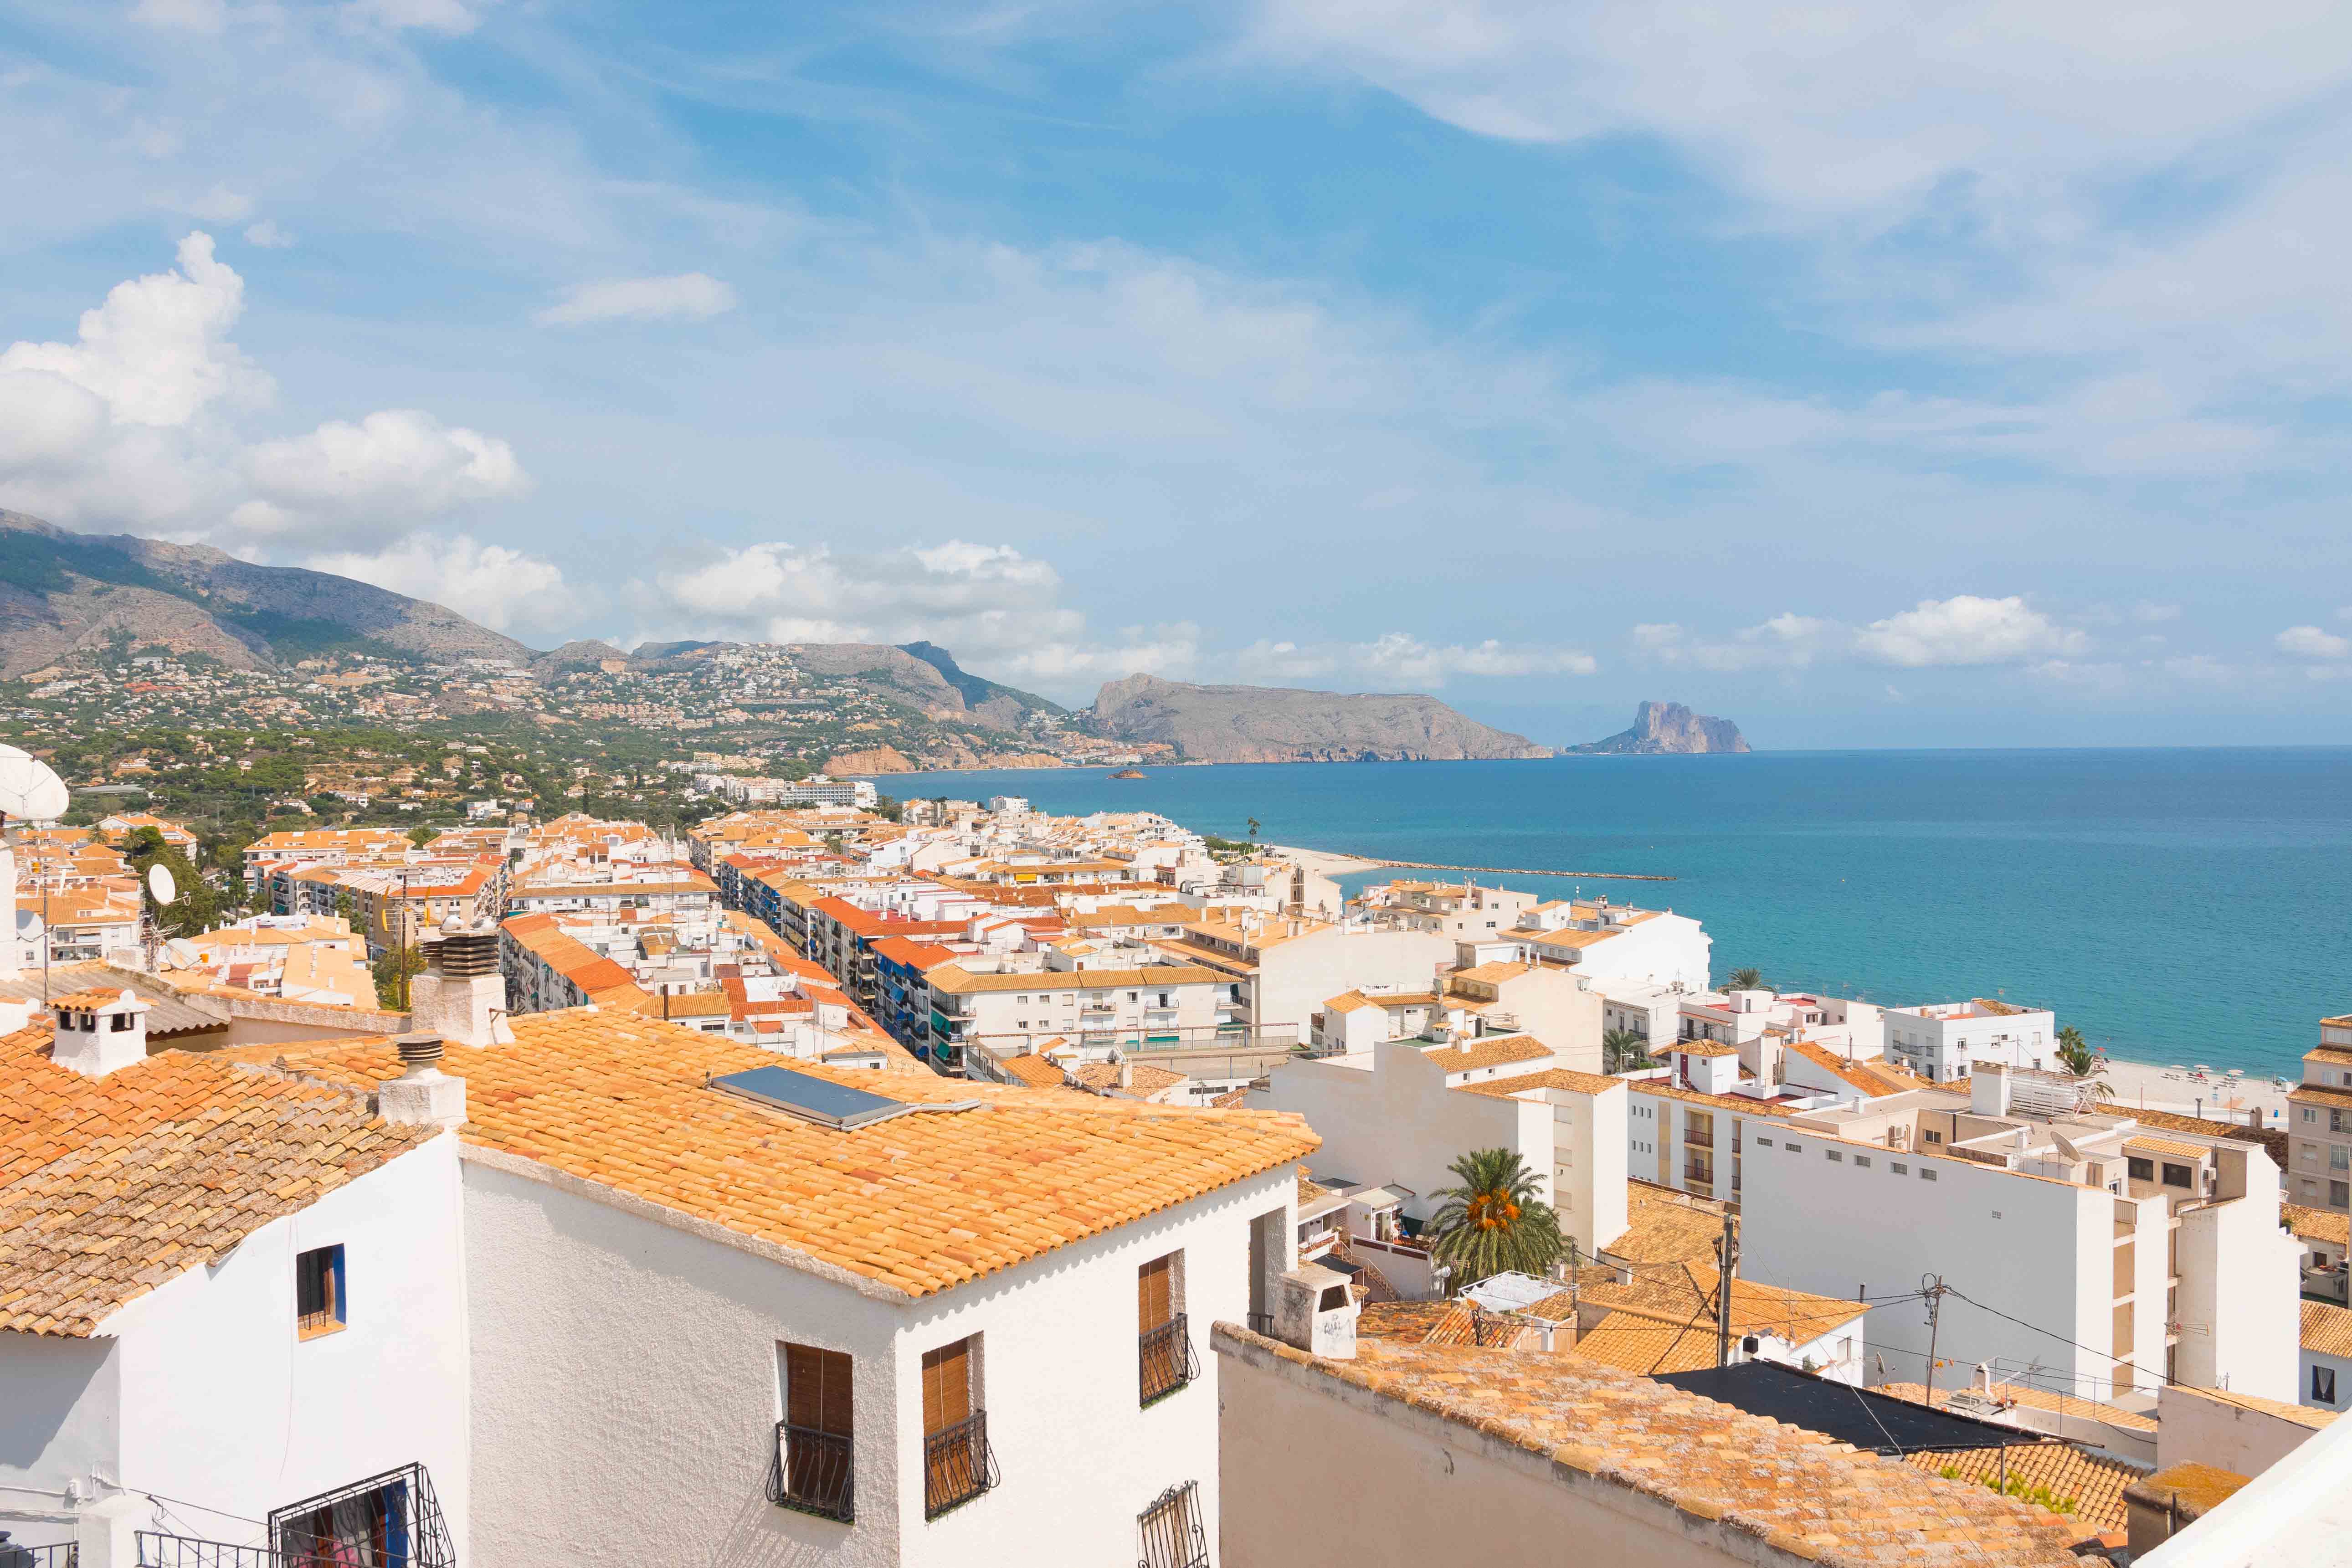 View over the historic white buildings in Altea, Spain.